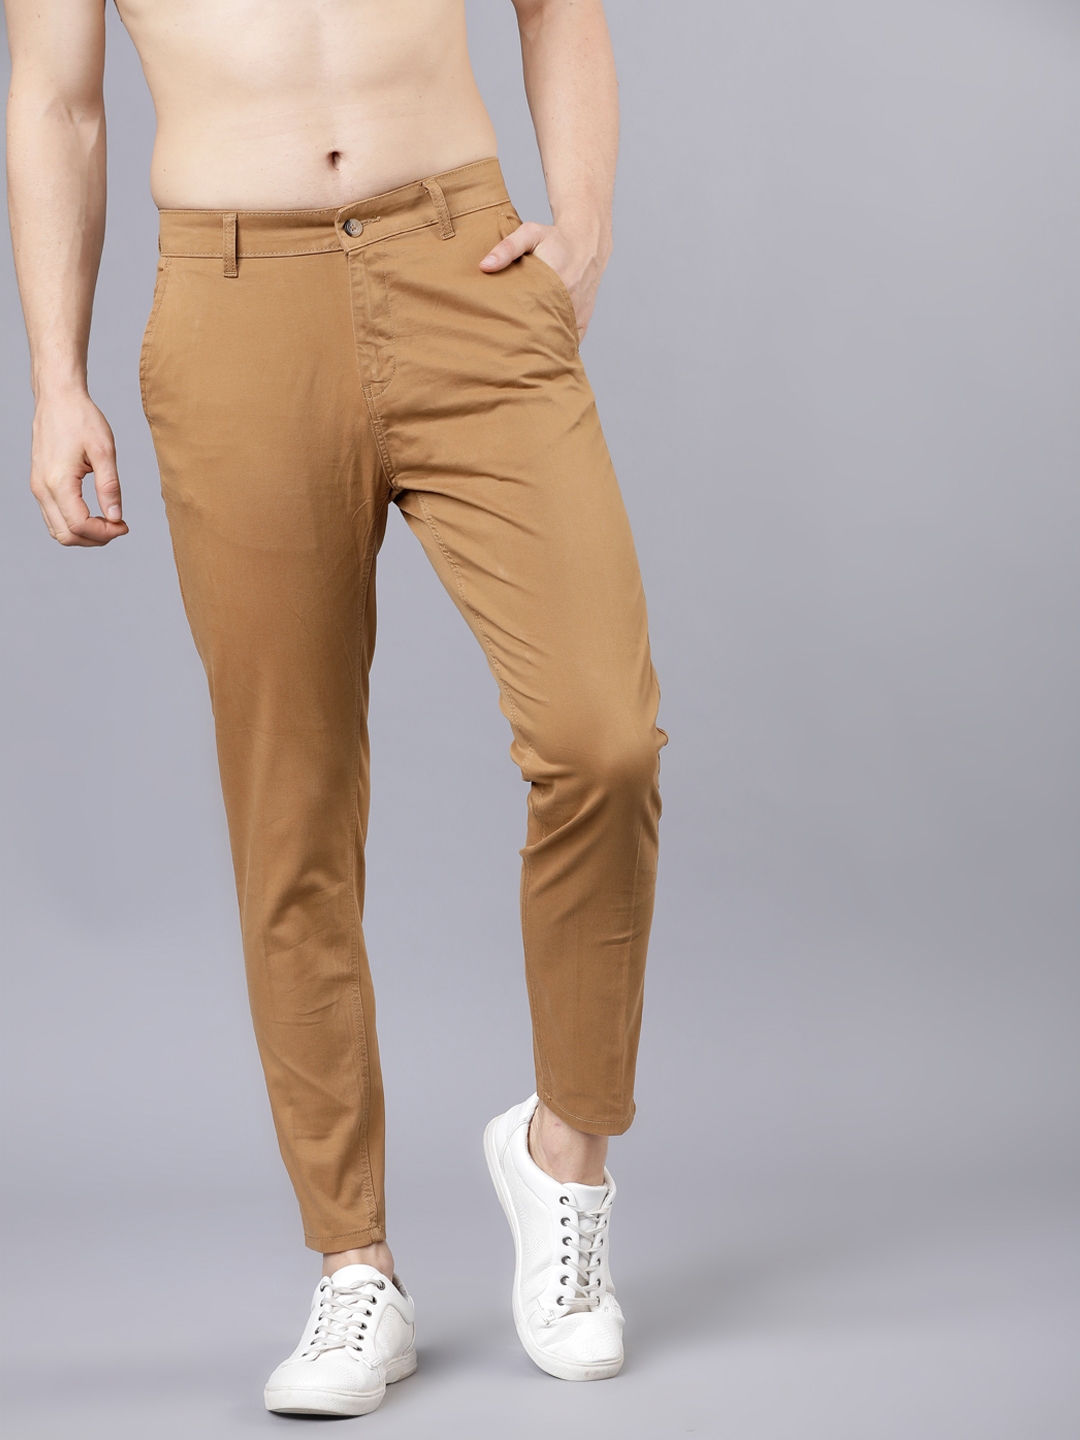 Grey Solid Mens Trousers Tapered Fit